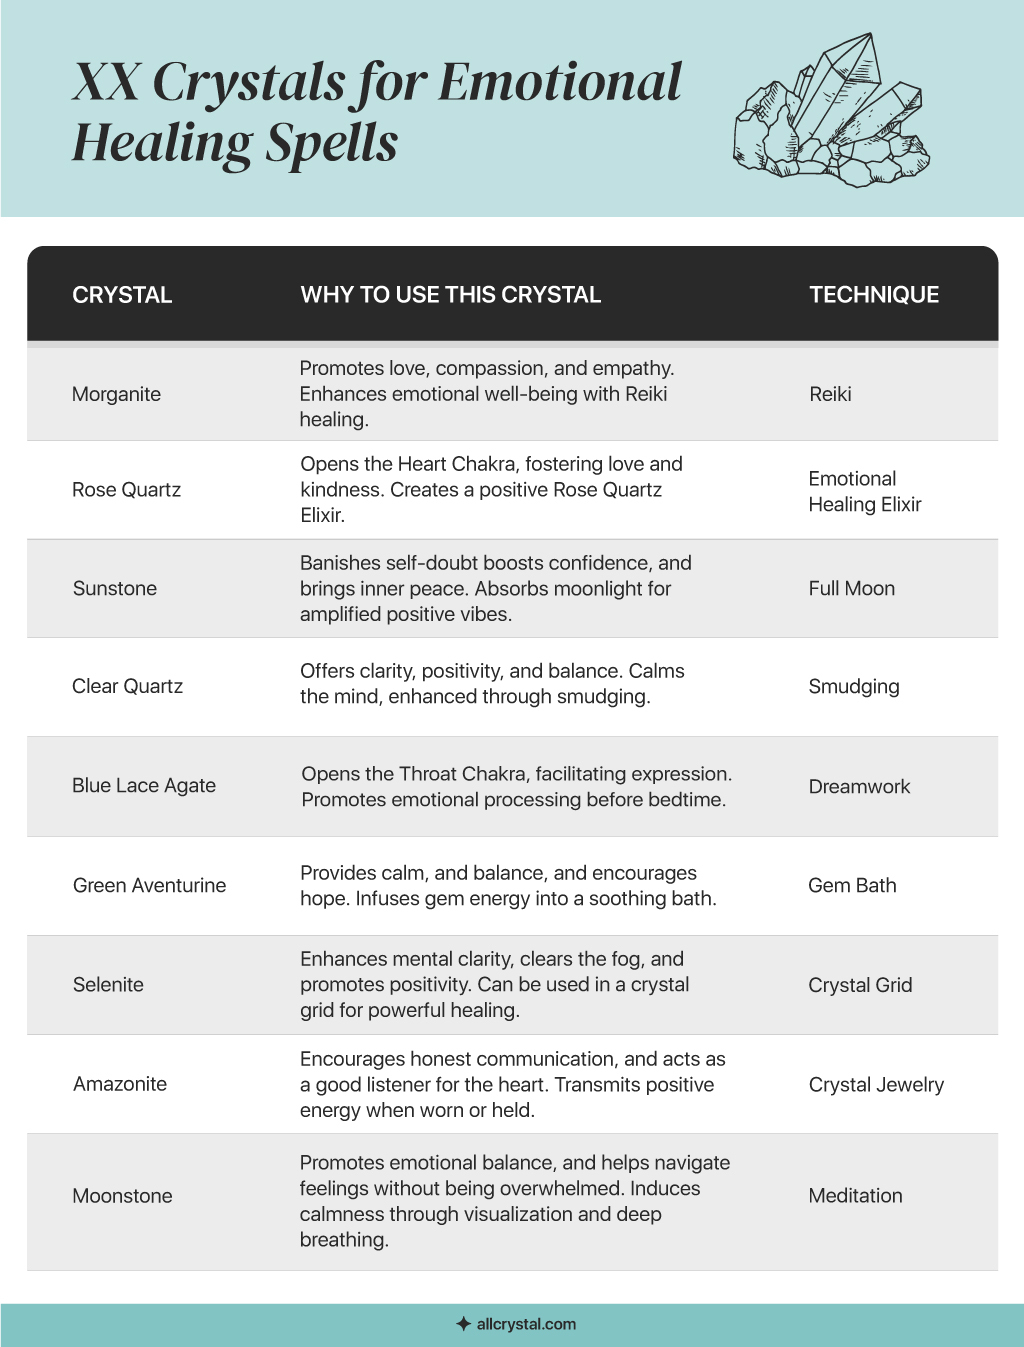 A graphic table containing information about 9 Crystals for Emotional Healing Spells